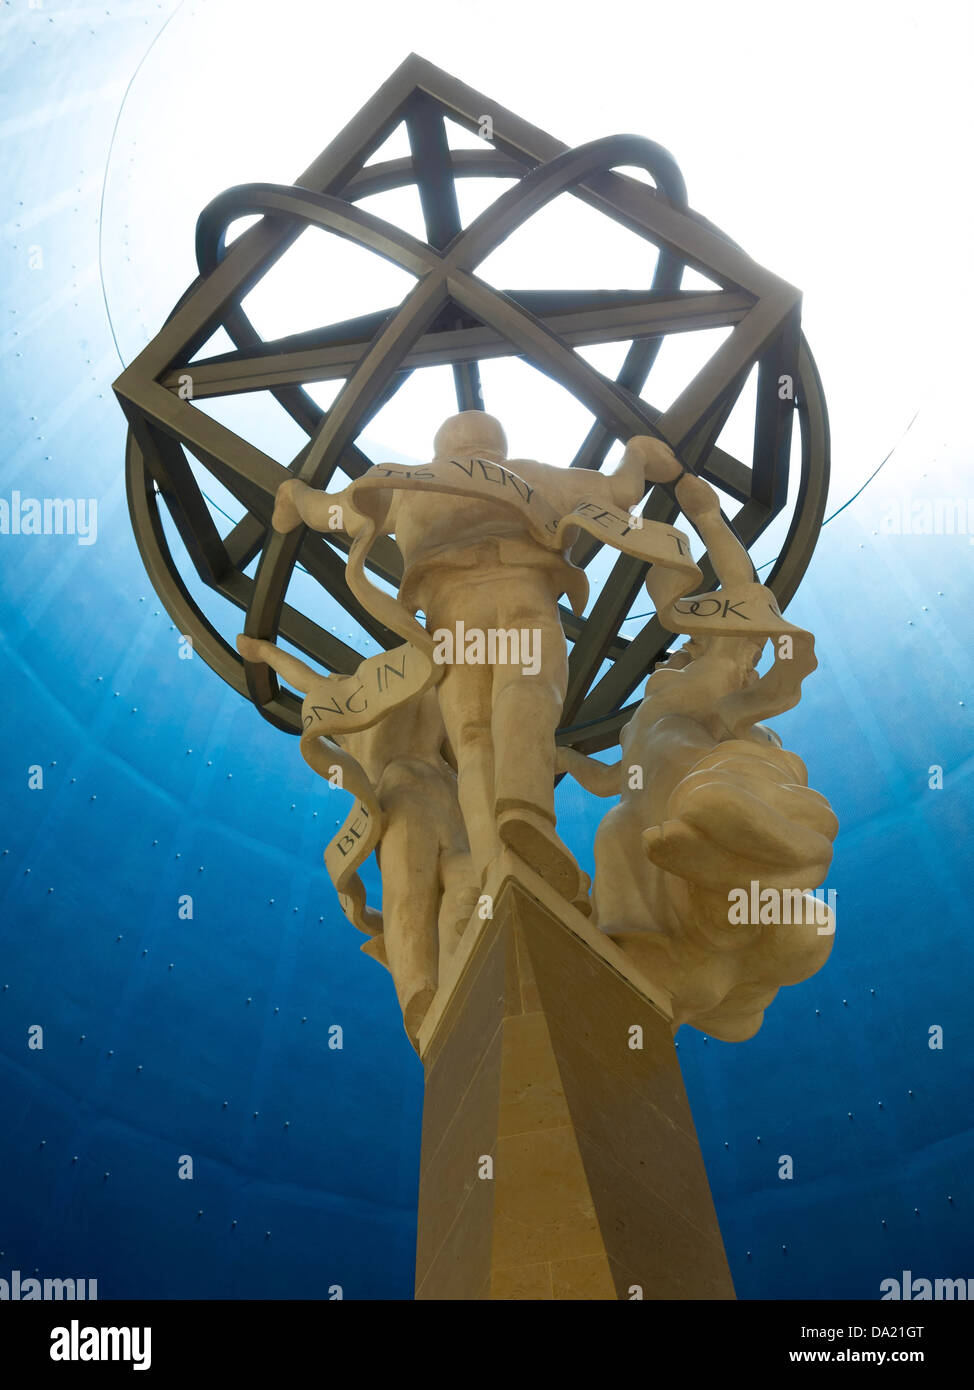 Armillary sphere sculpture, public art in the Star Court at Bluewater Shopping Centre, Greenhithe, Kent, England, UK Stock Photo